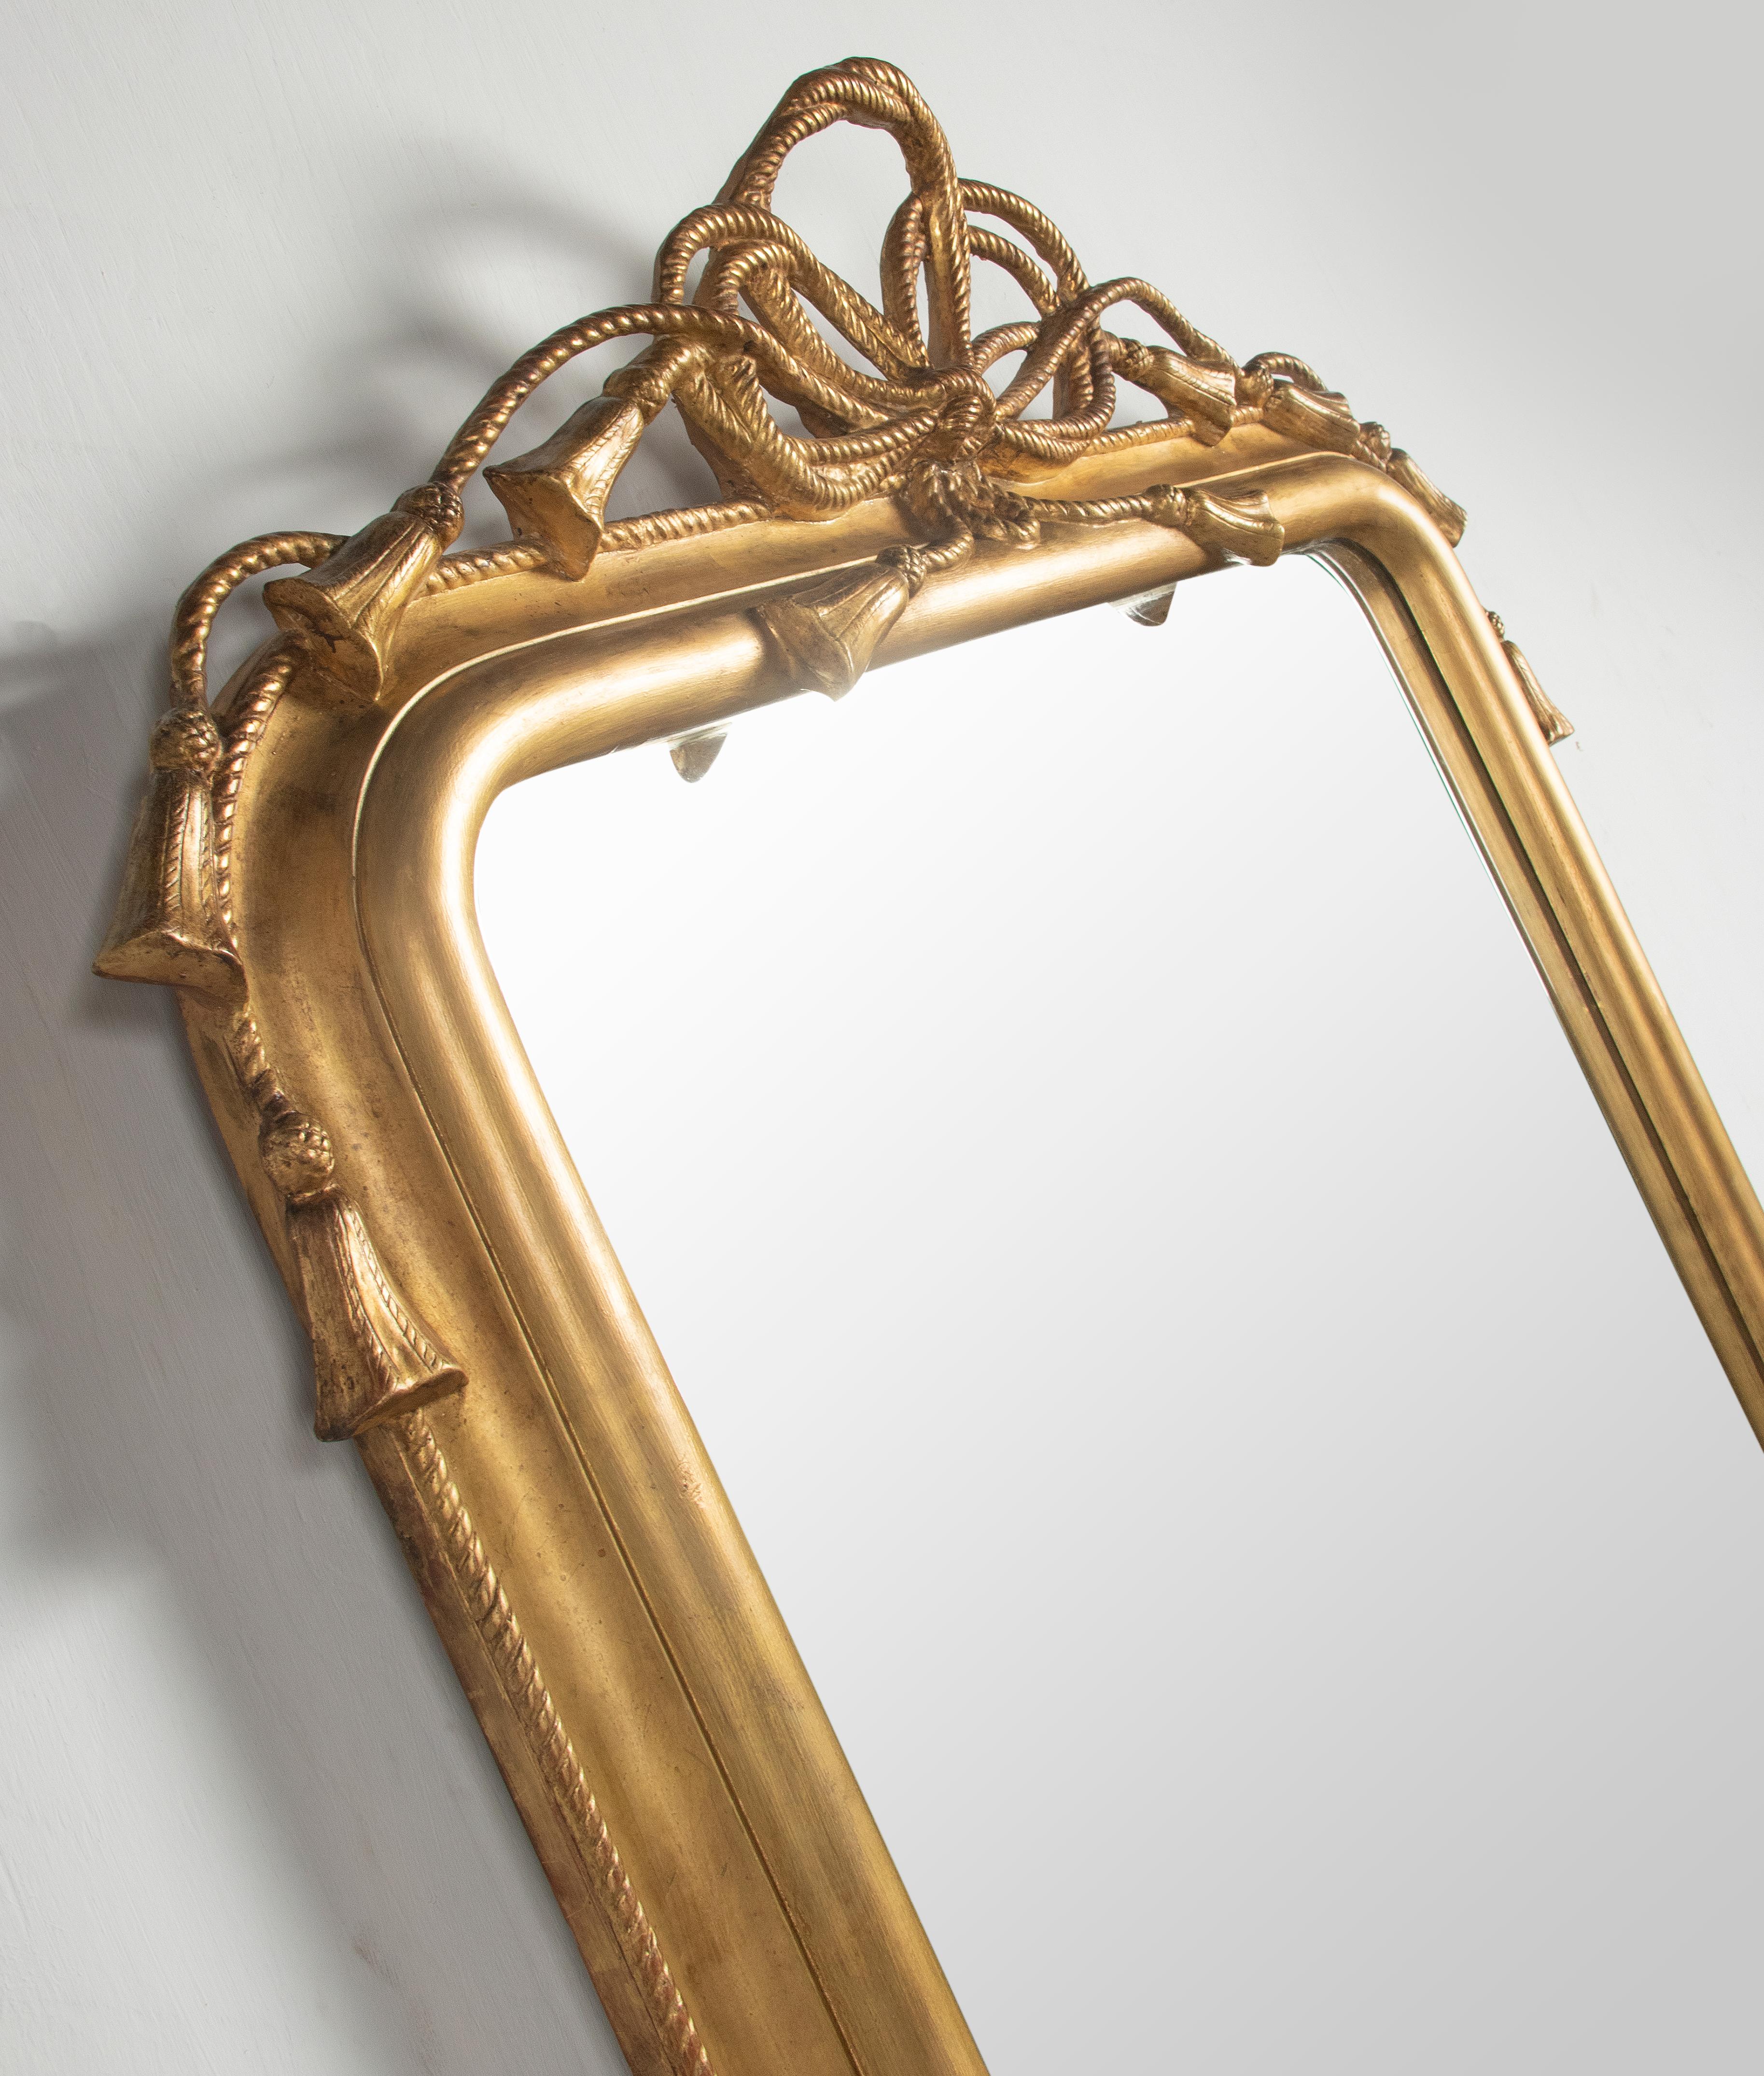 19th Century Napoleon III Gilded Wall Mirror with Rope and Tassels For Sale 5